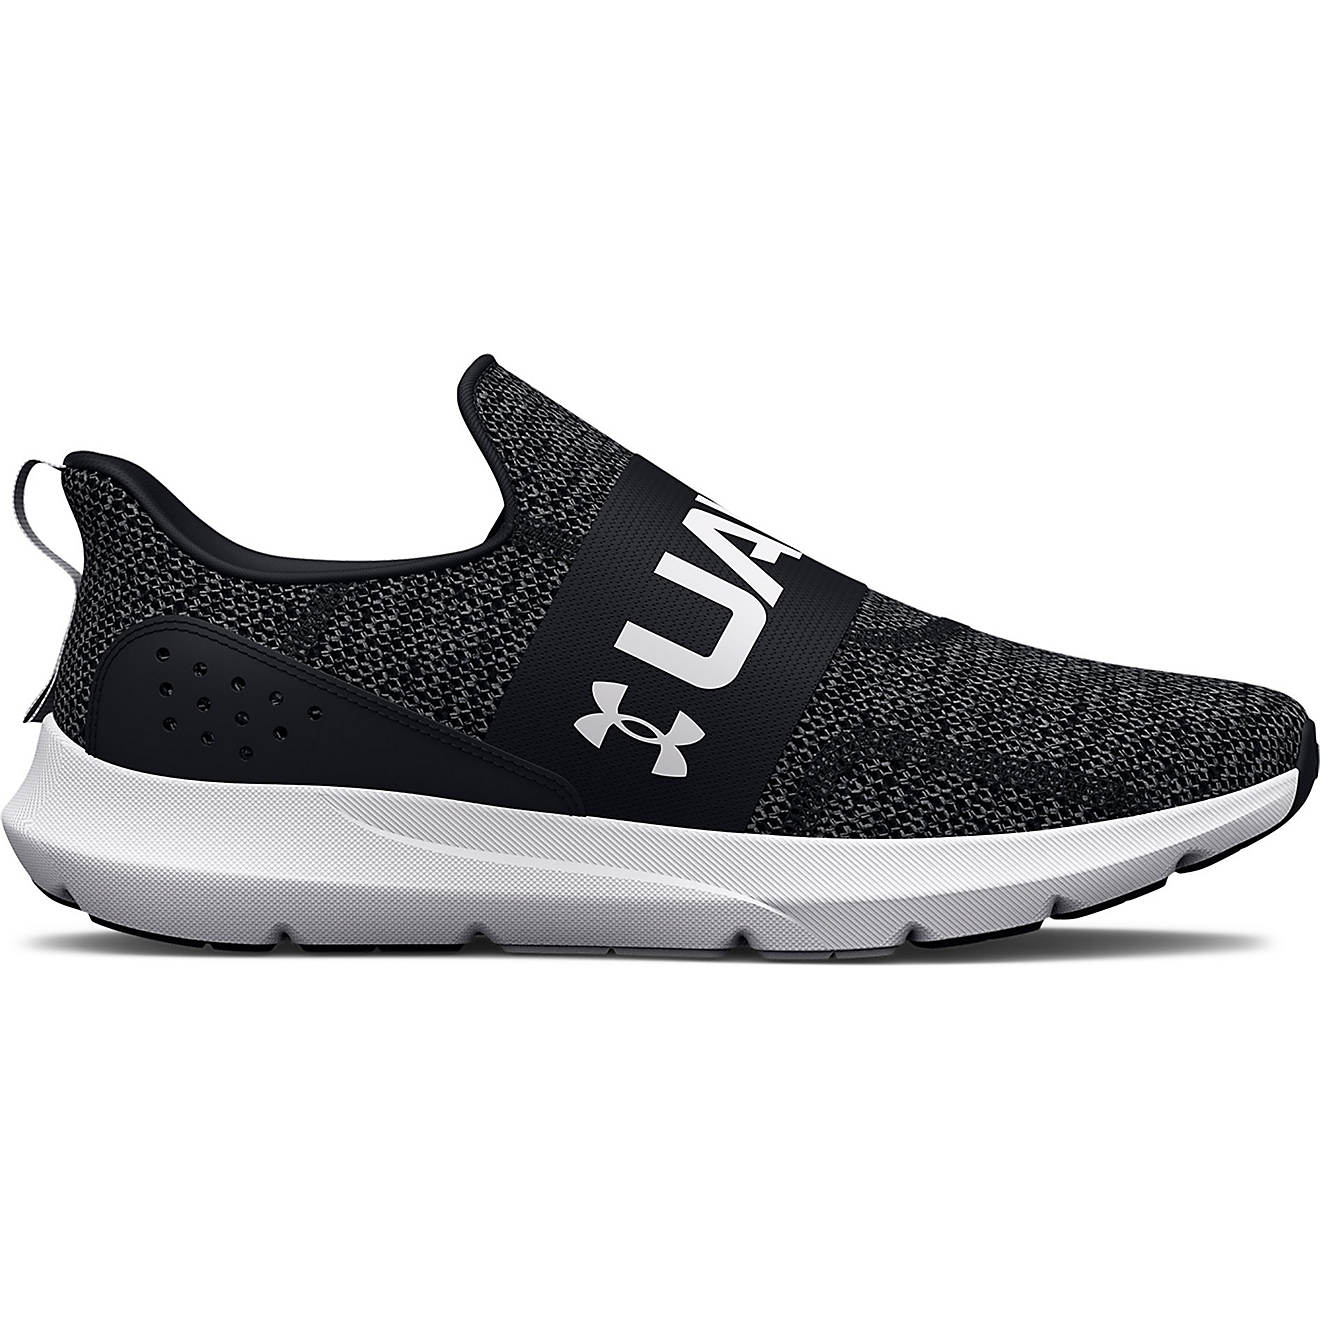 Under Armour Men’s Surge 3 Slip-On Running Shoes | Academy